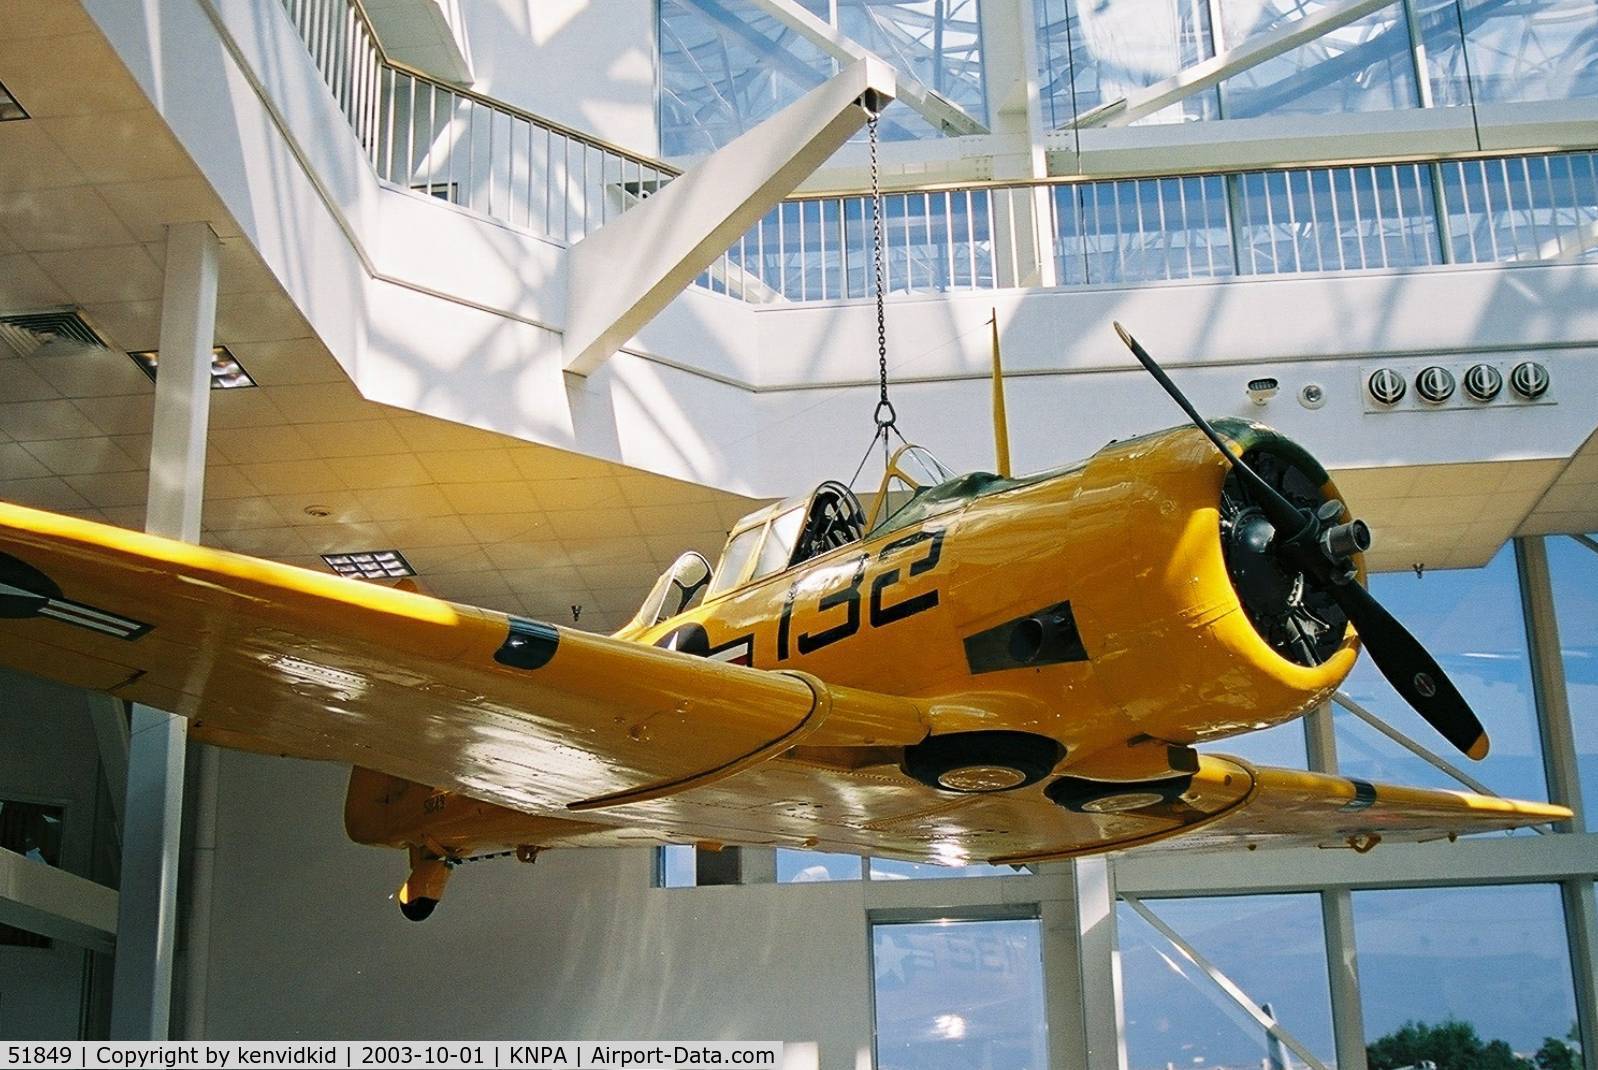 51849, North American SNJ-5 Texan Texan C/N 88-14827, On display at the Museum of Naval Aviation, Pensacola.